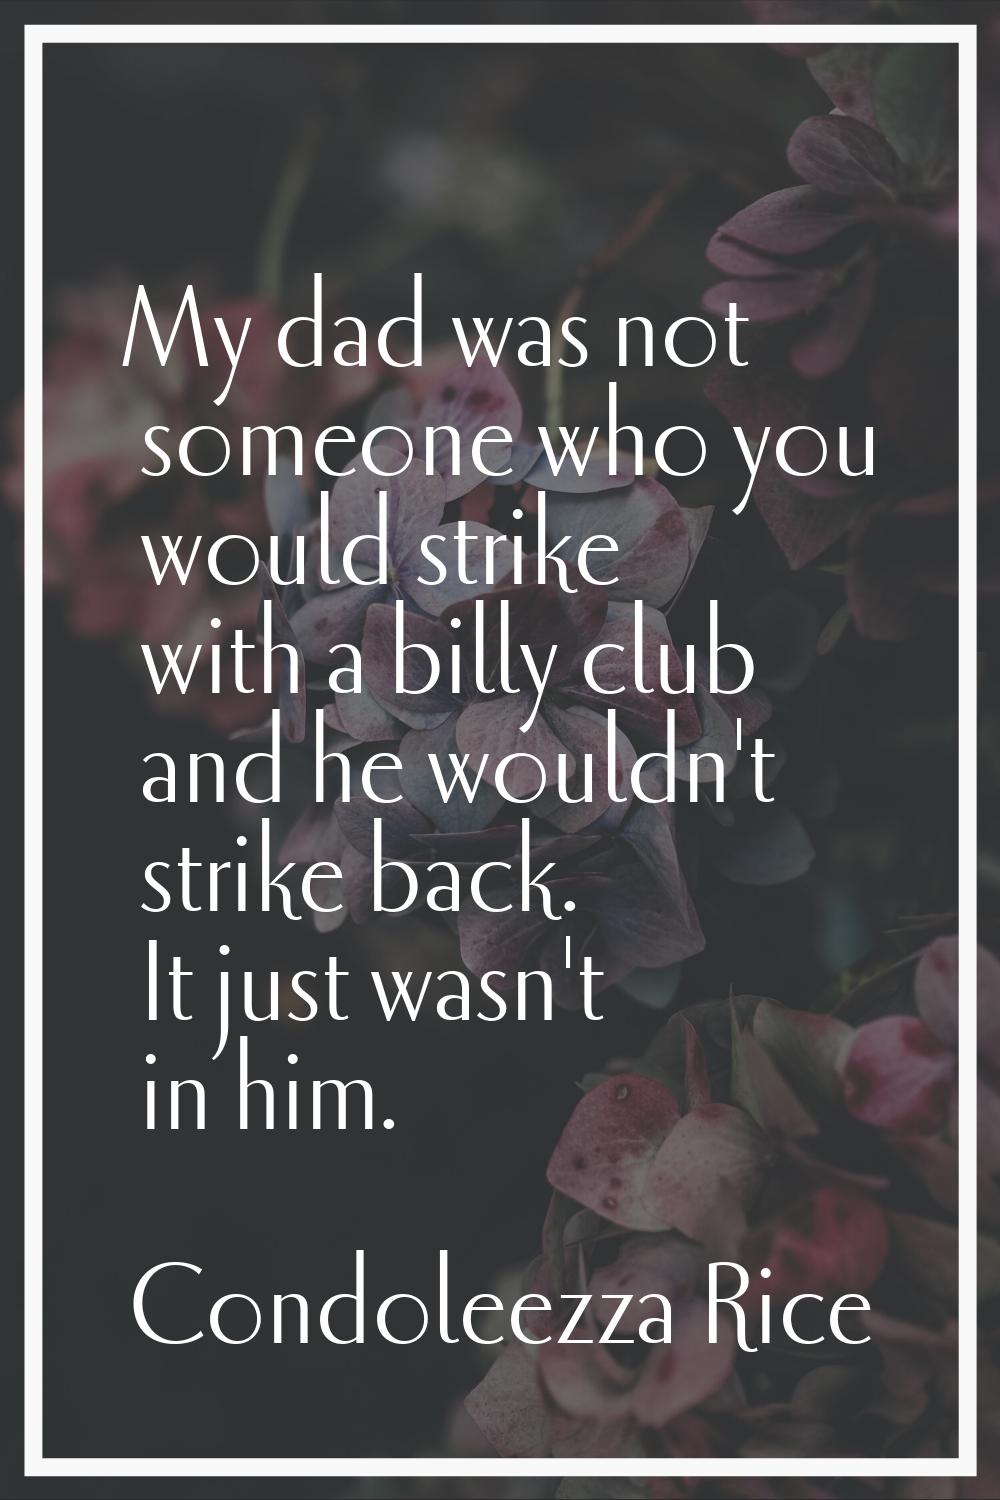 My dad was not someone who you would strike with a billy club and he wouldn't strike back. It just 